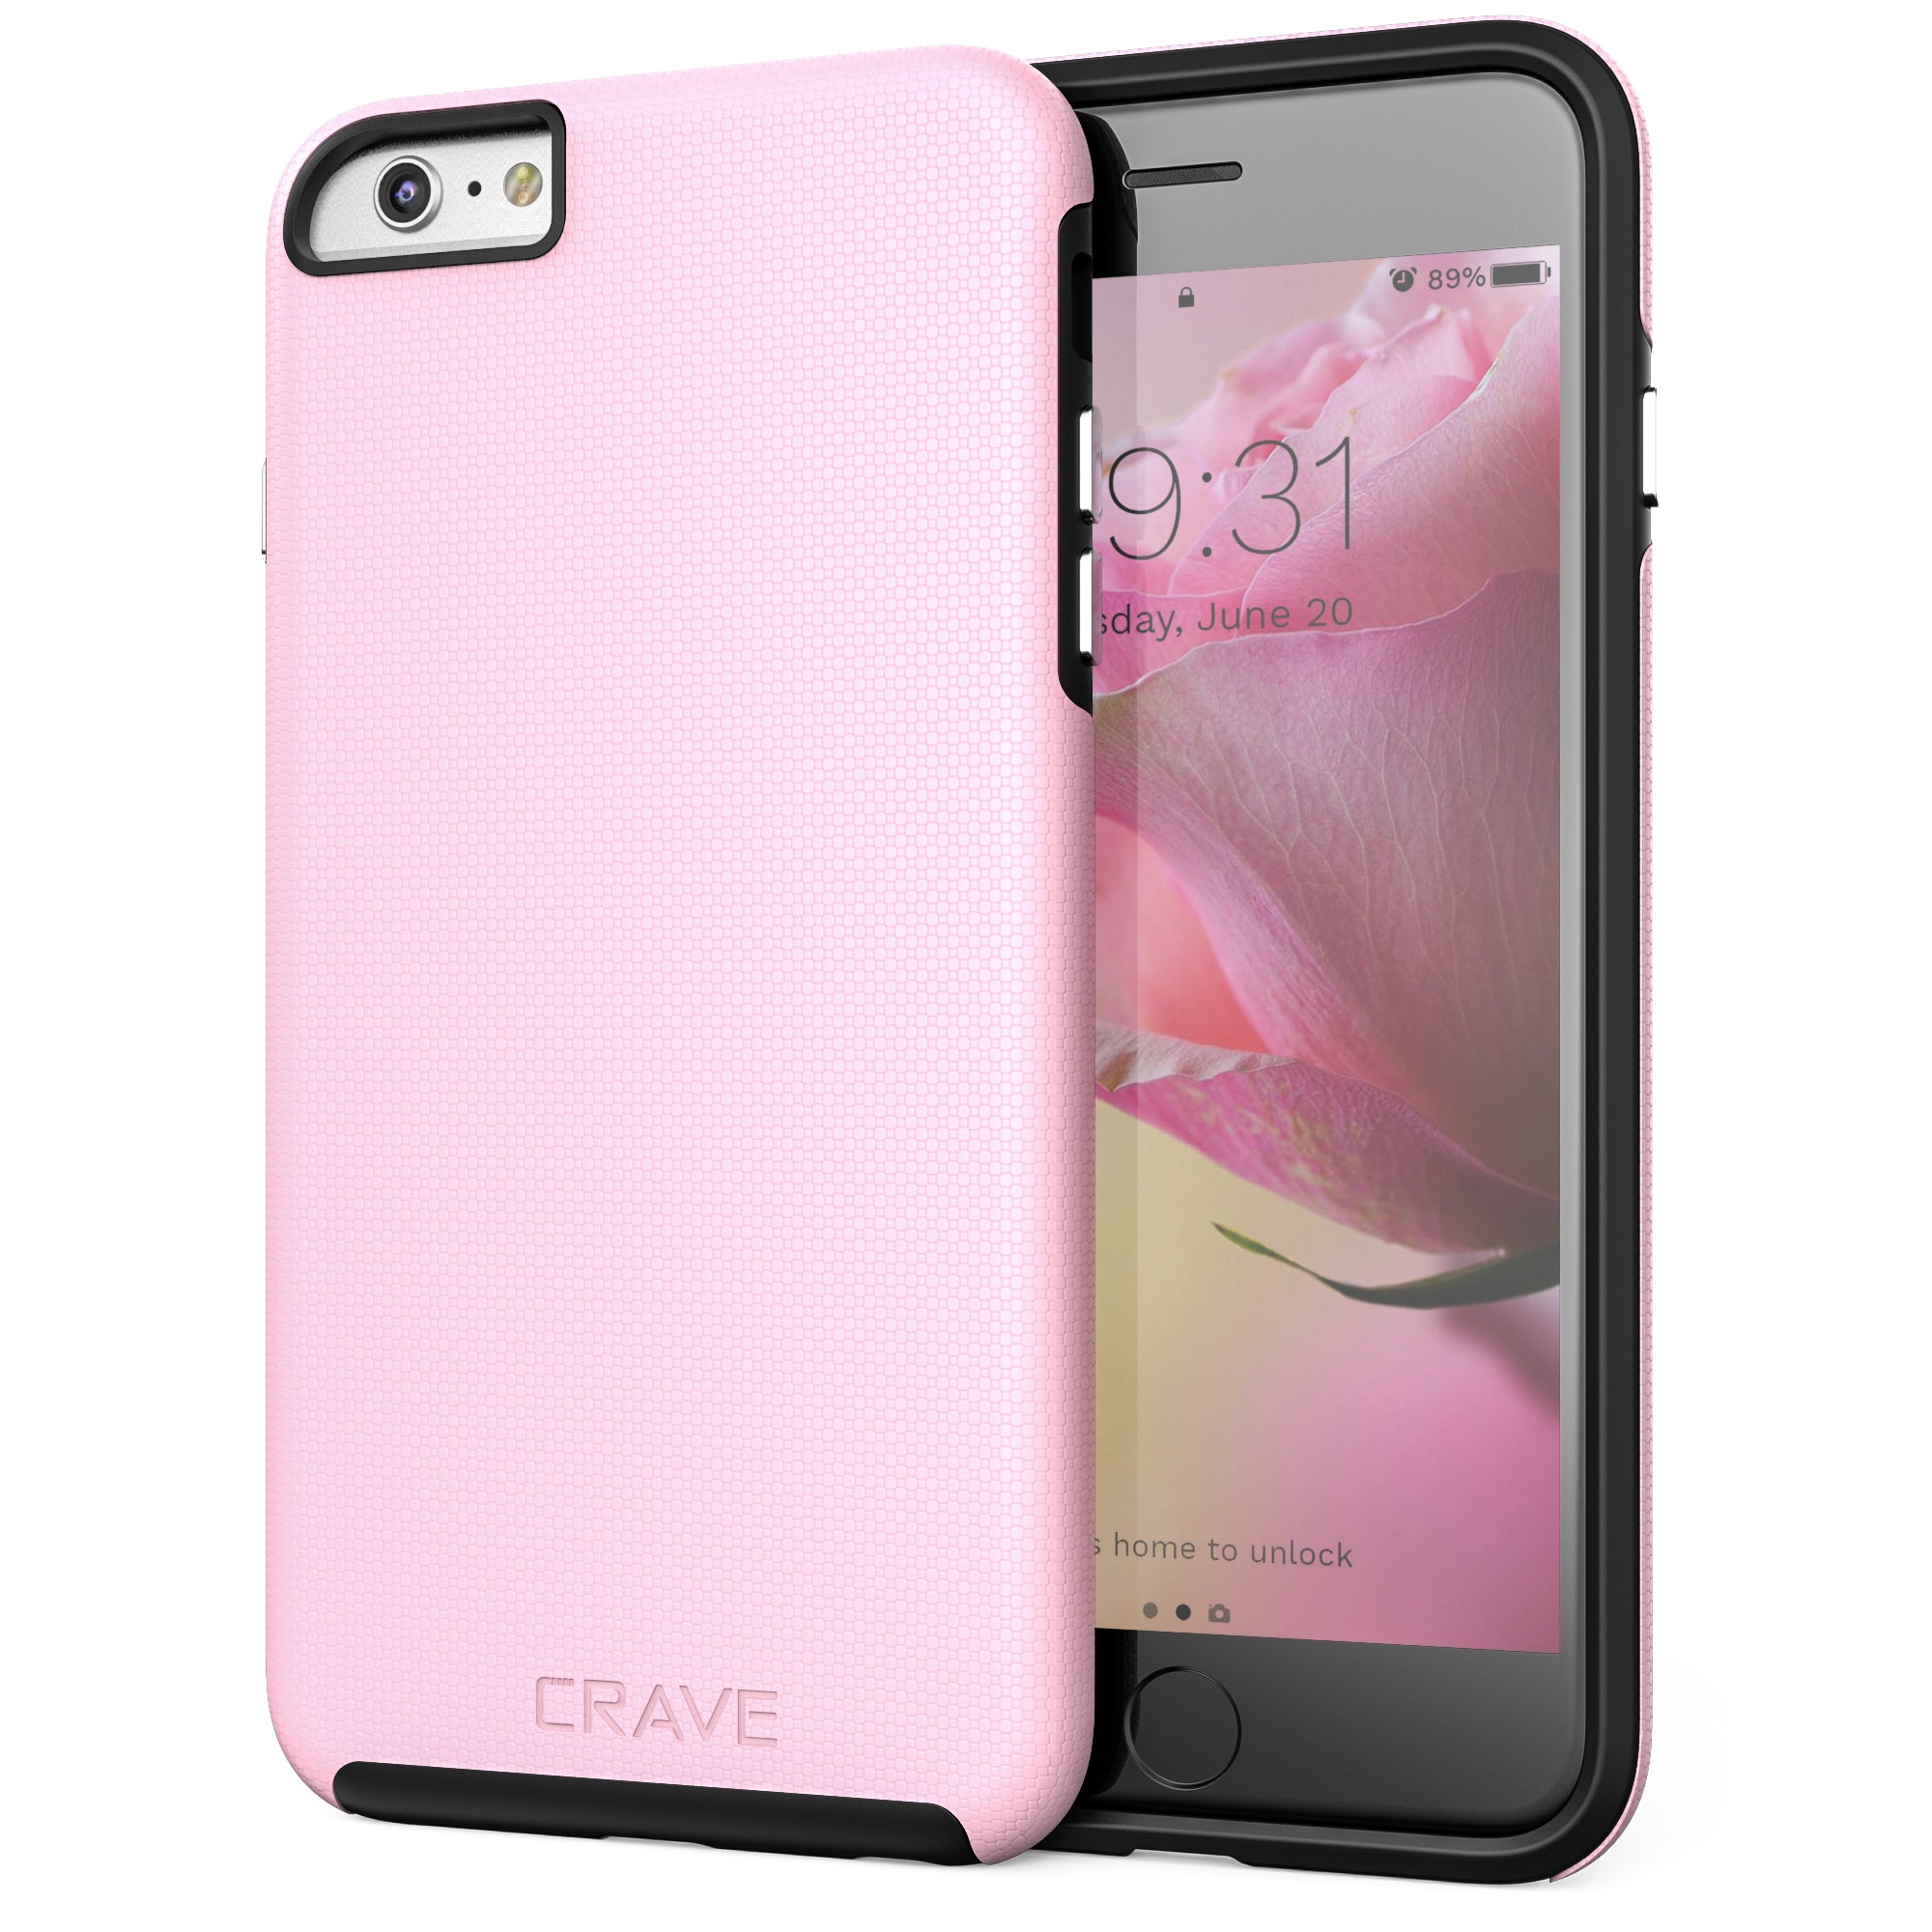 iPhone 6S Plus Cases  Protective Cases for iPhone 6S+